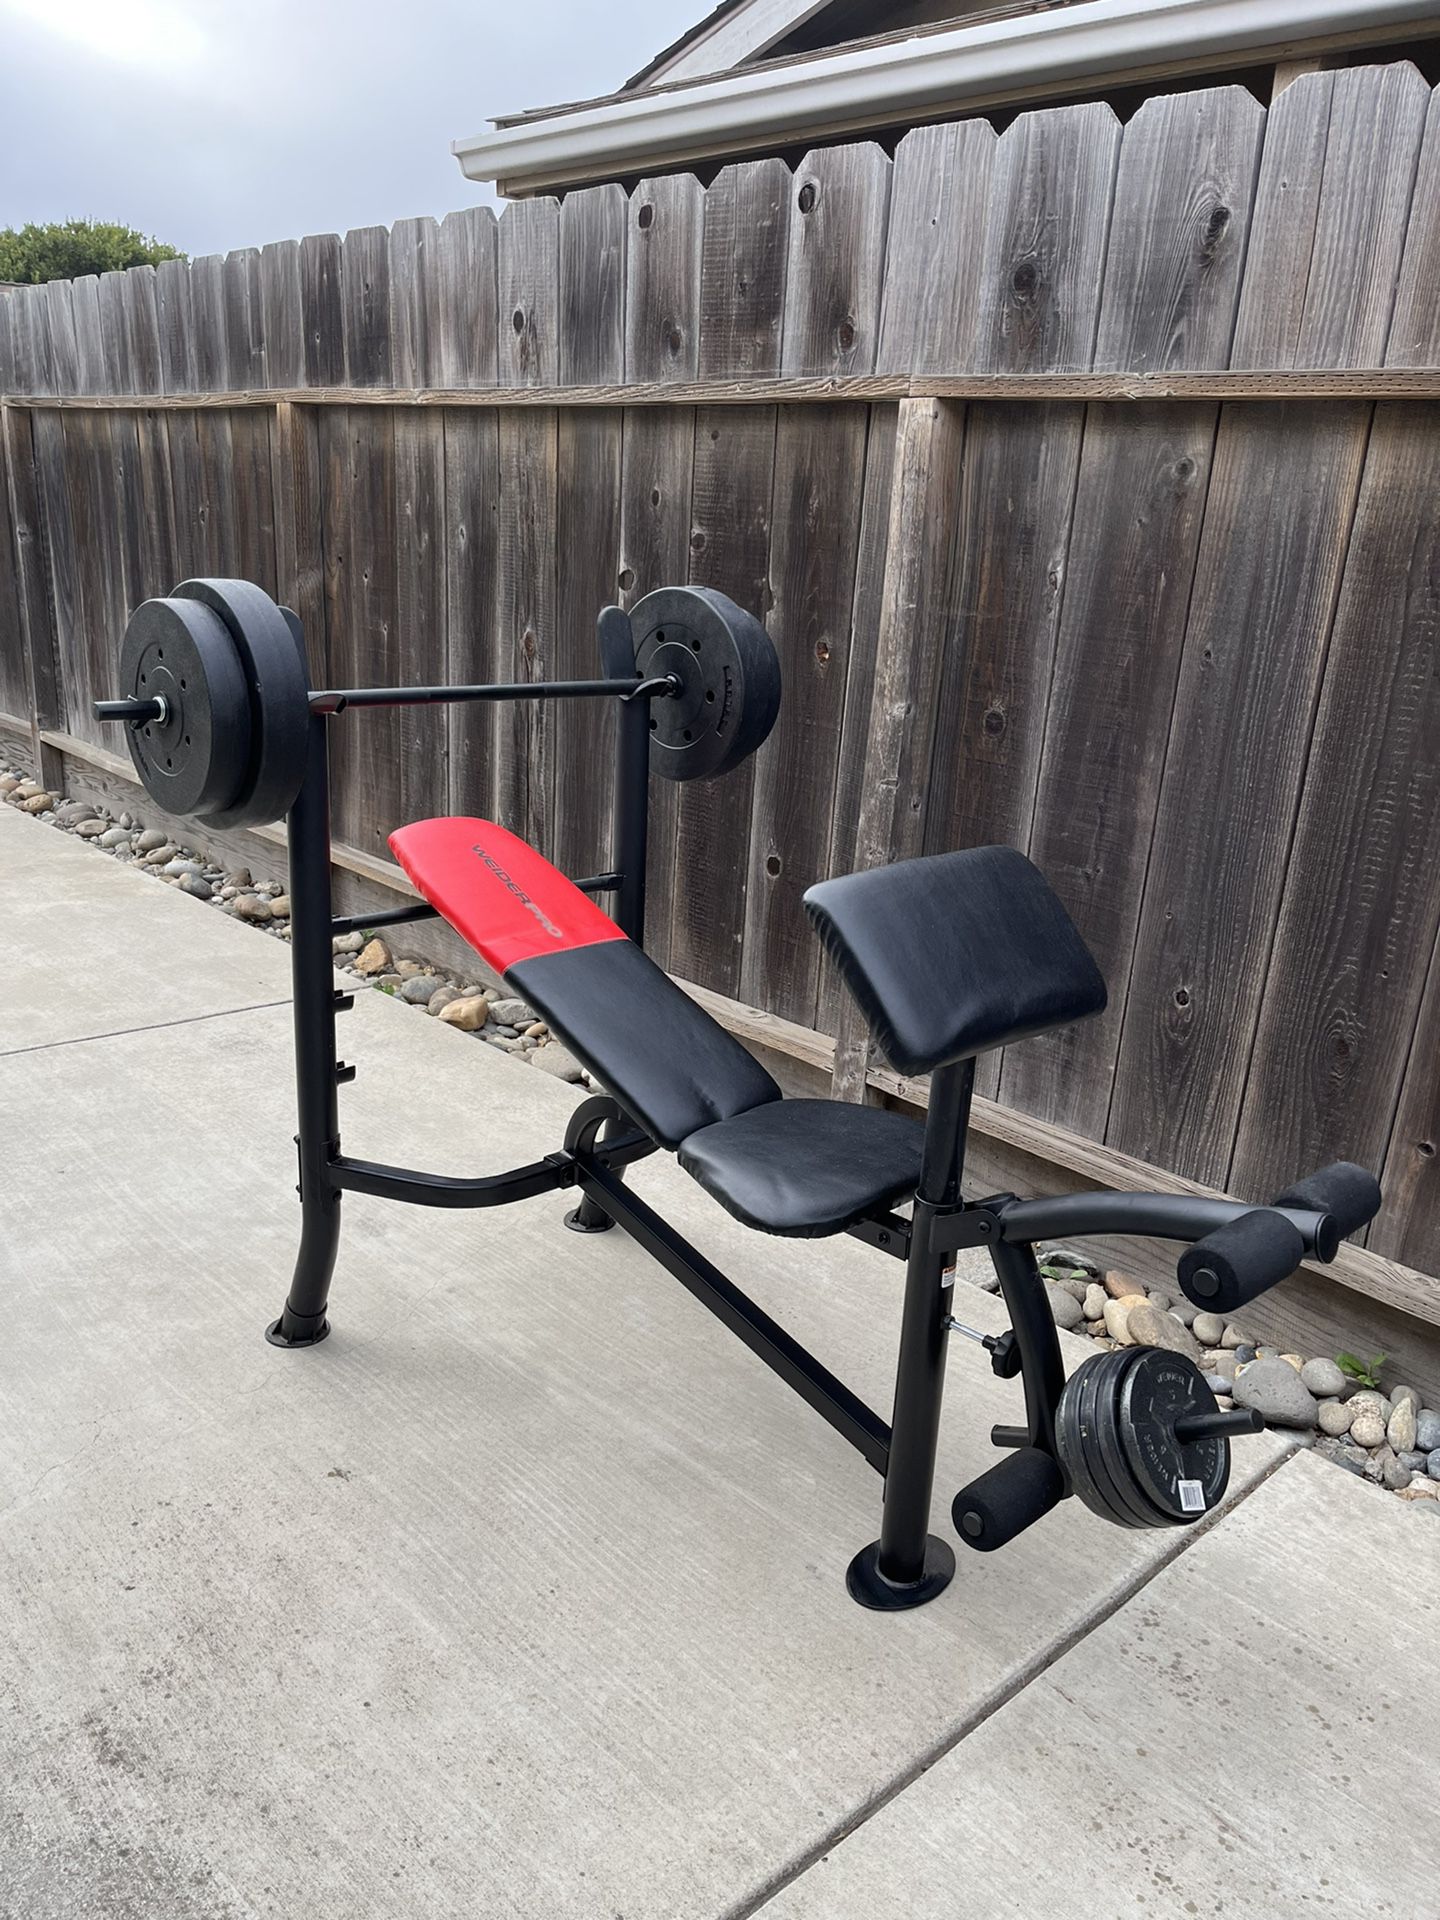 Weights and Bench Set.